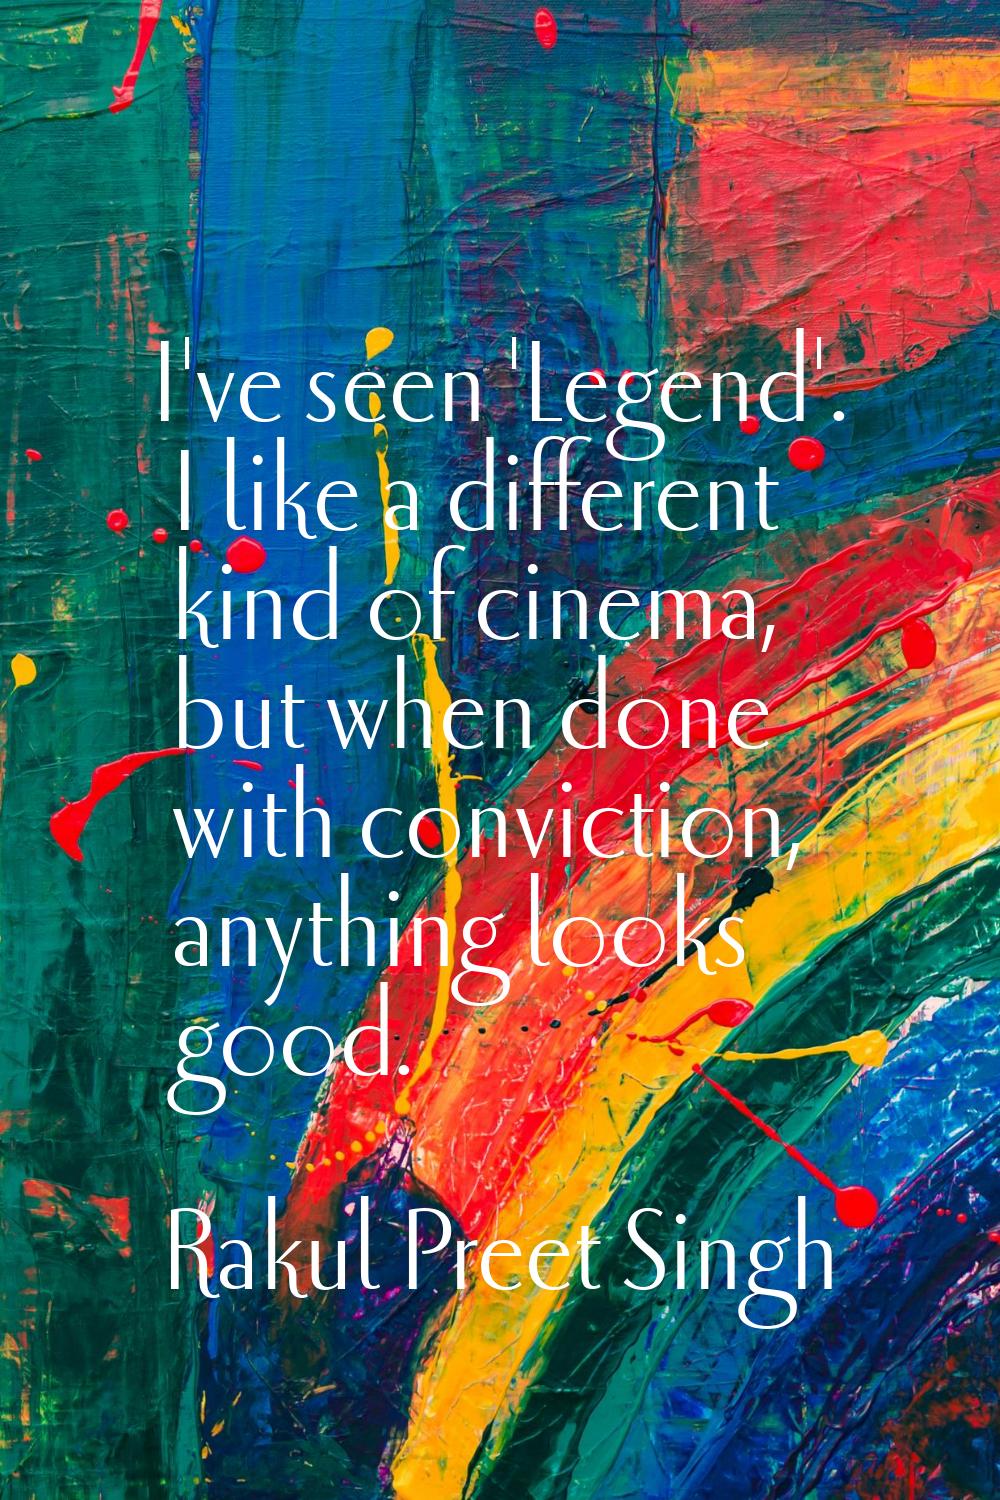 I've seen 'Legend'. I like a different kind of cinema, but when done with conviction, anything look